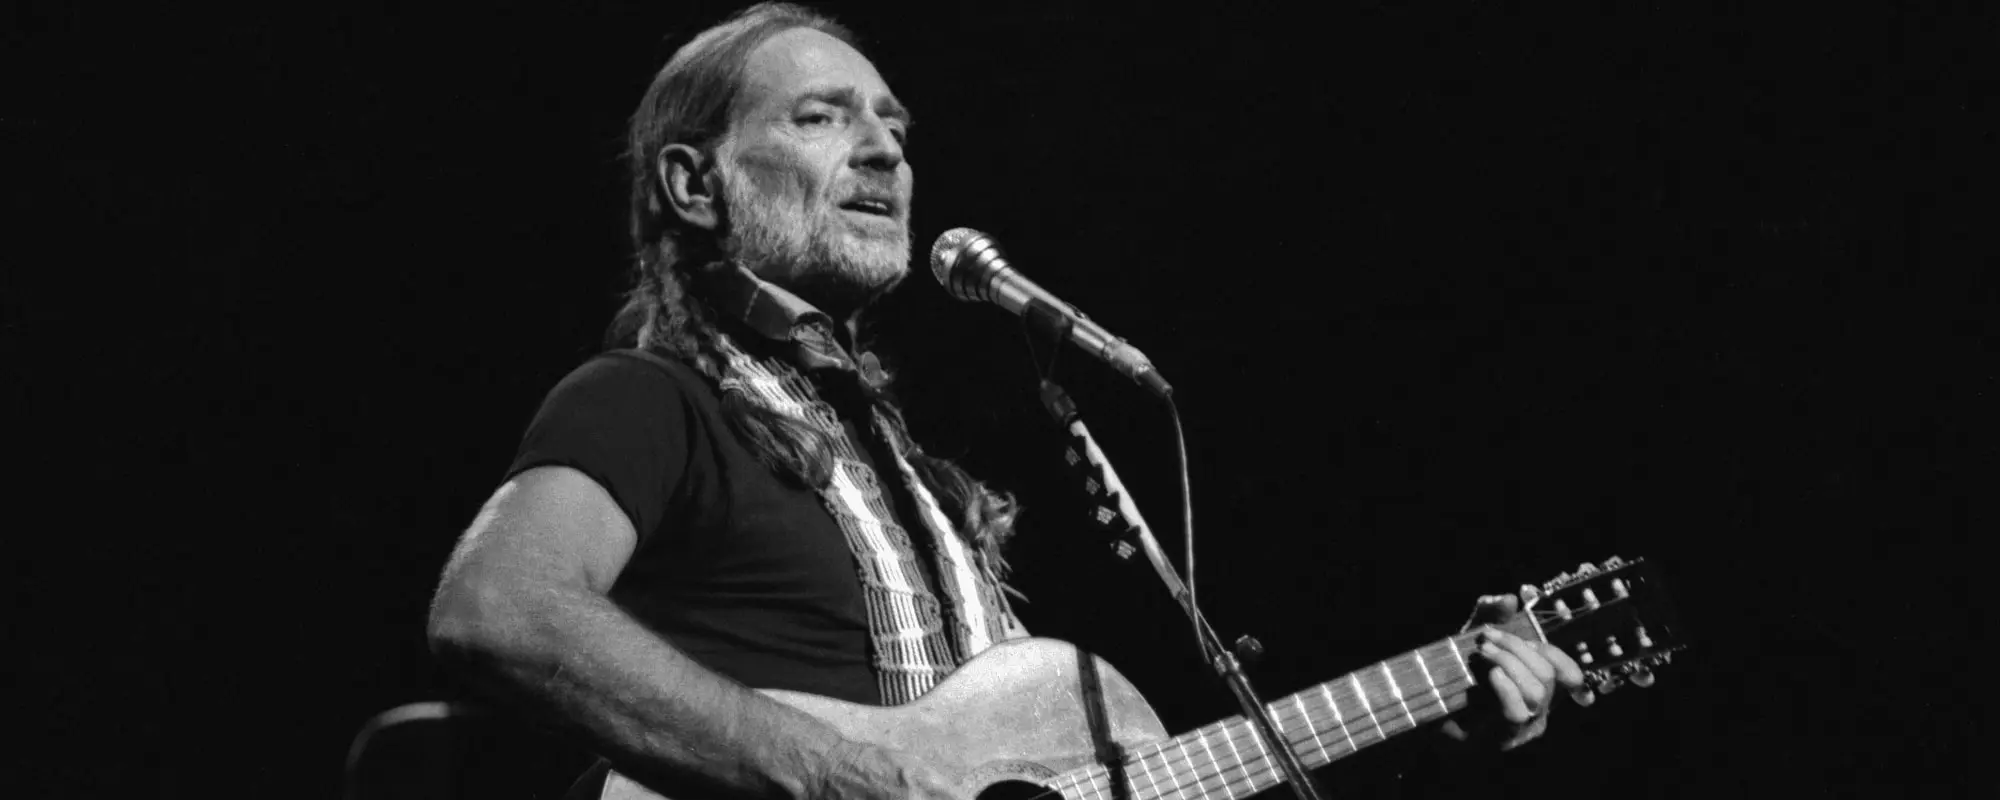 3 Songs From Willie Nelson That Will Make You Cry